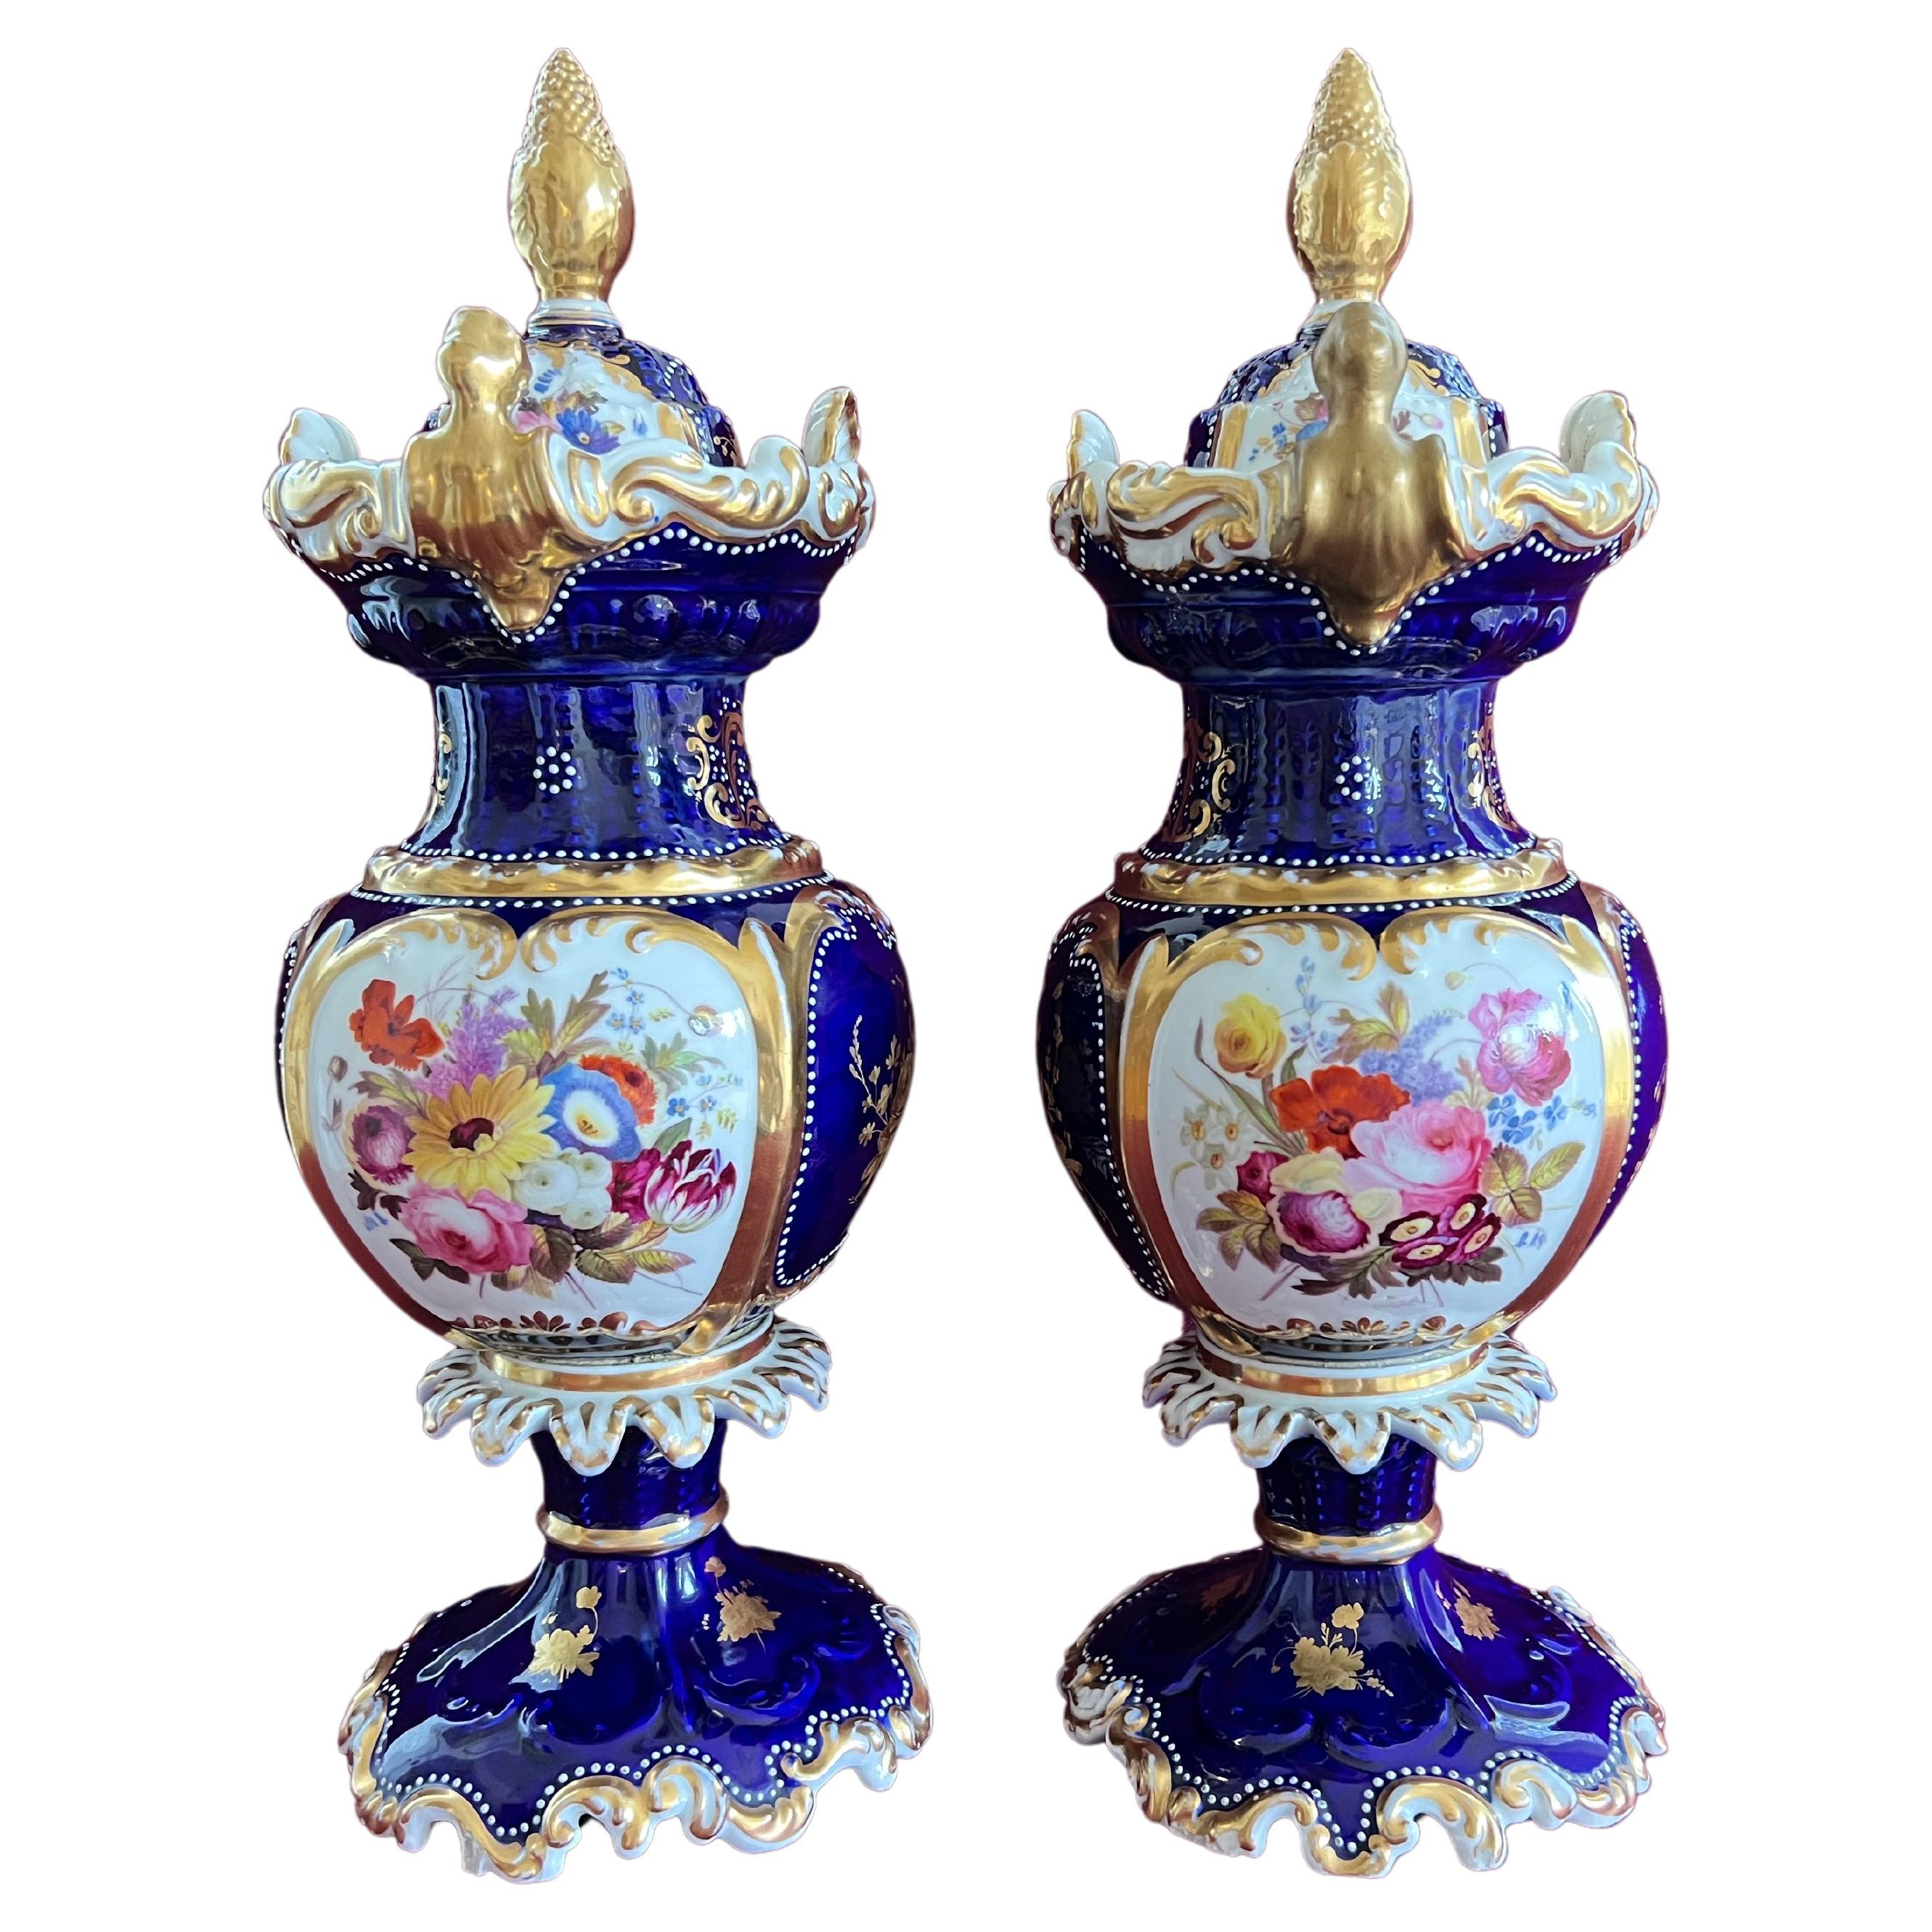 Tall Pair of Chamberlain Worcester Porcelain Vases, circa 1842-1845